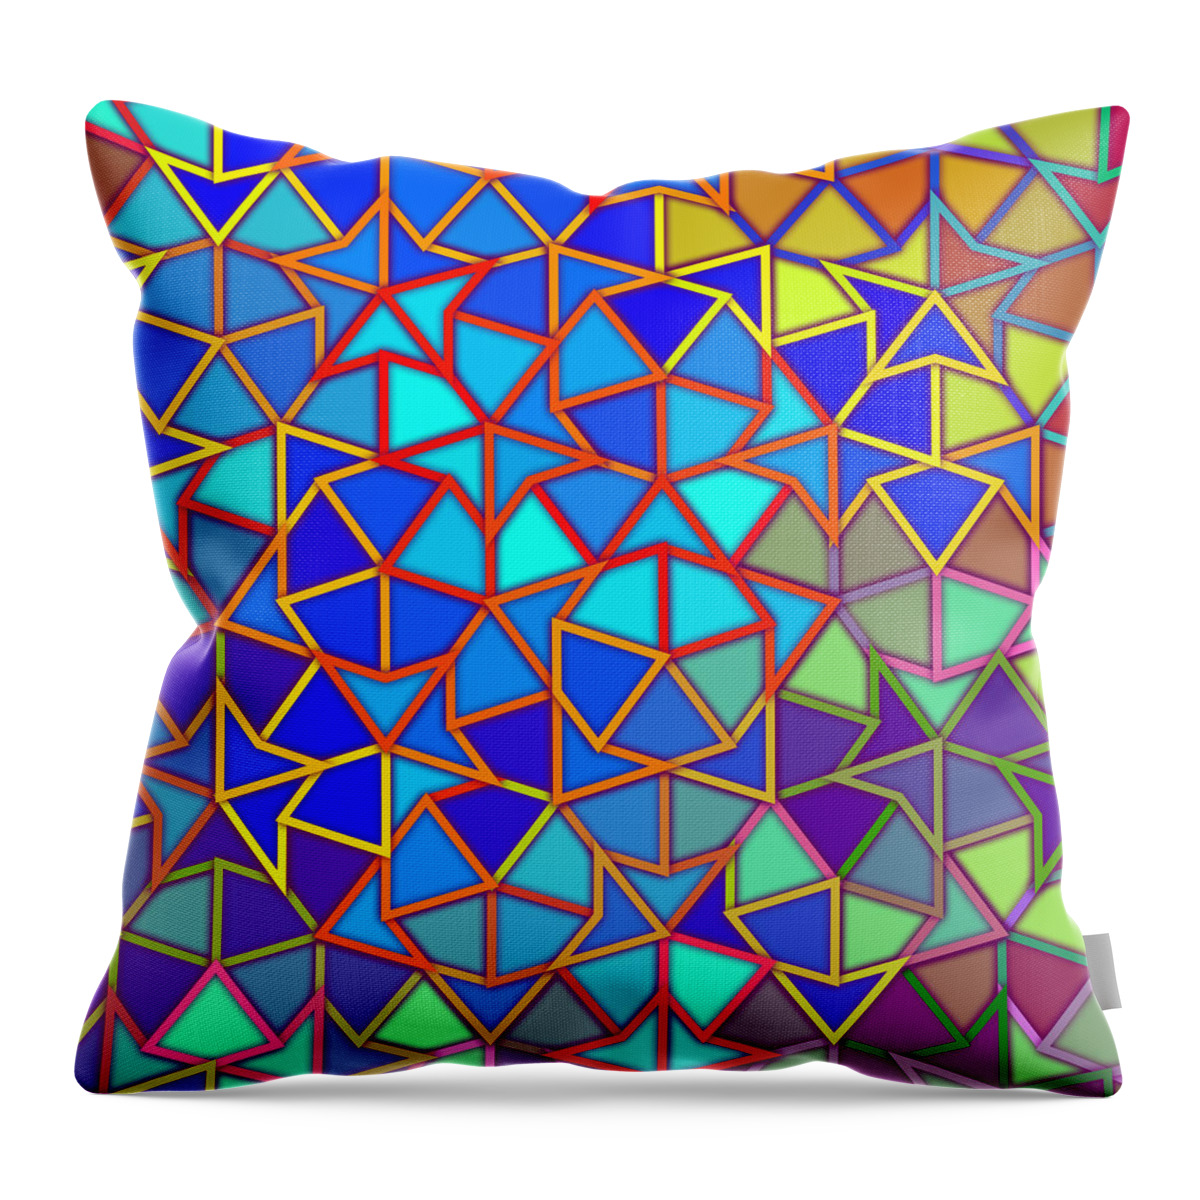 Abstract Throw Pillow featuring the digital art Pattern 13 by Marko Sabotin